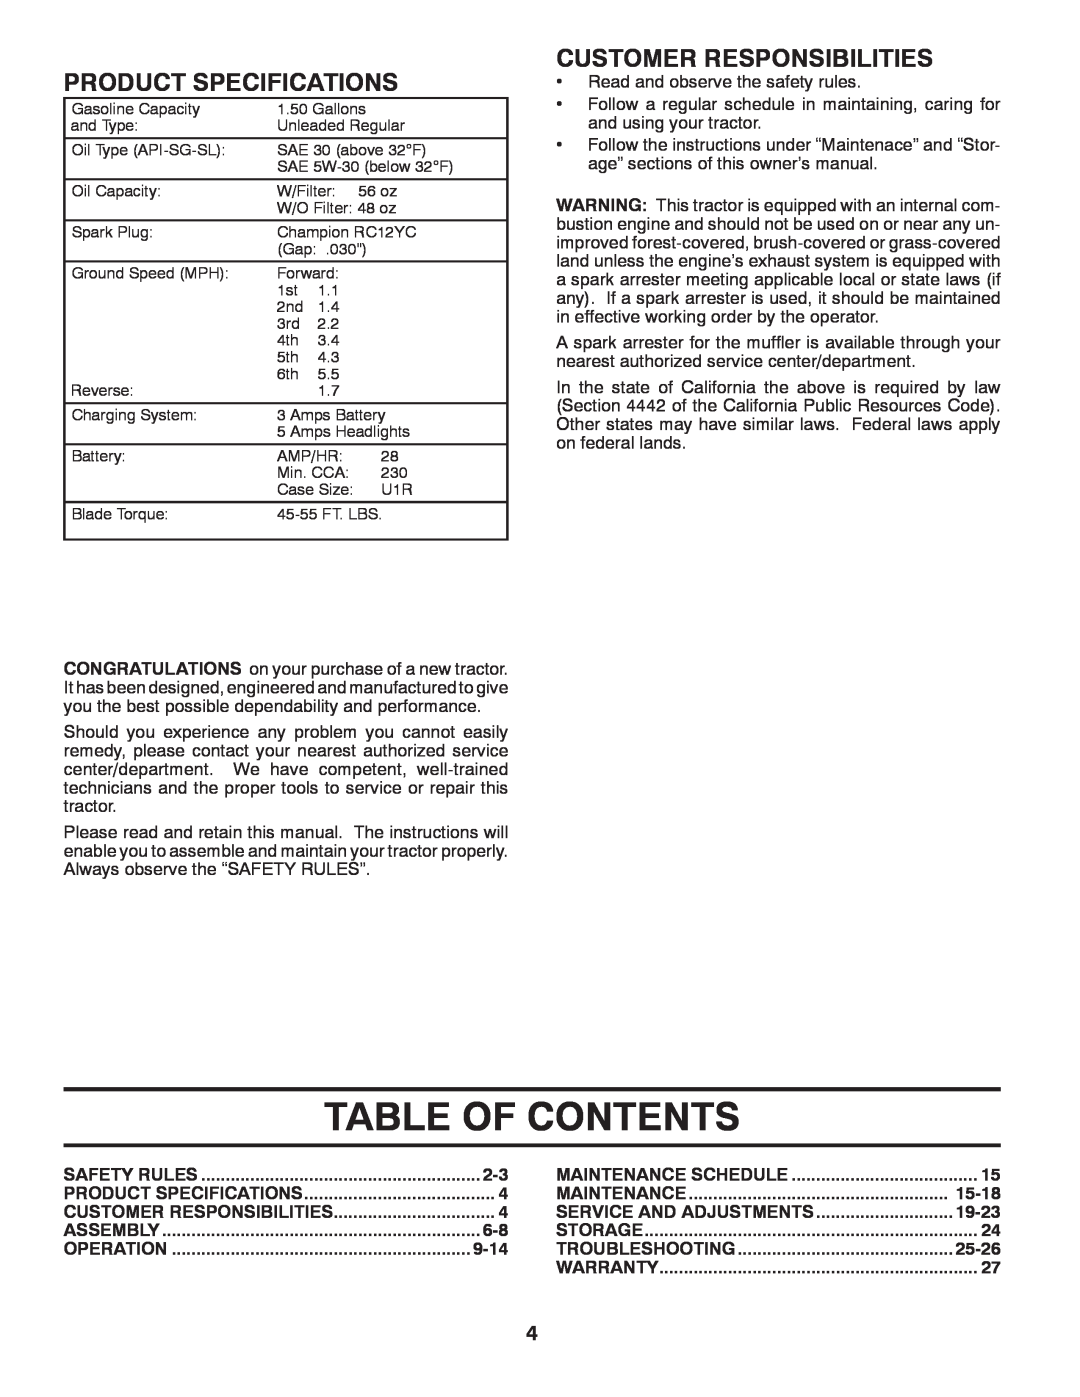 Poulan 96012008400, 418757 manual Table Of Contents, Product Specifications, Customer Responsibilities 